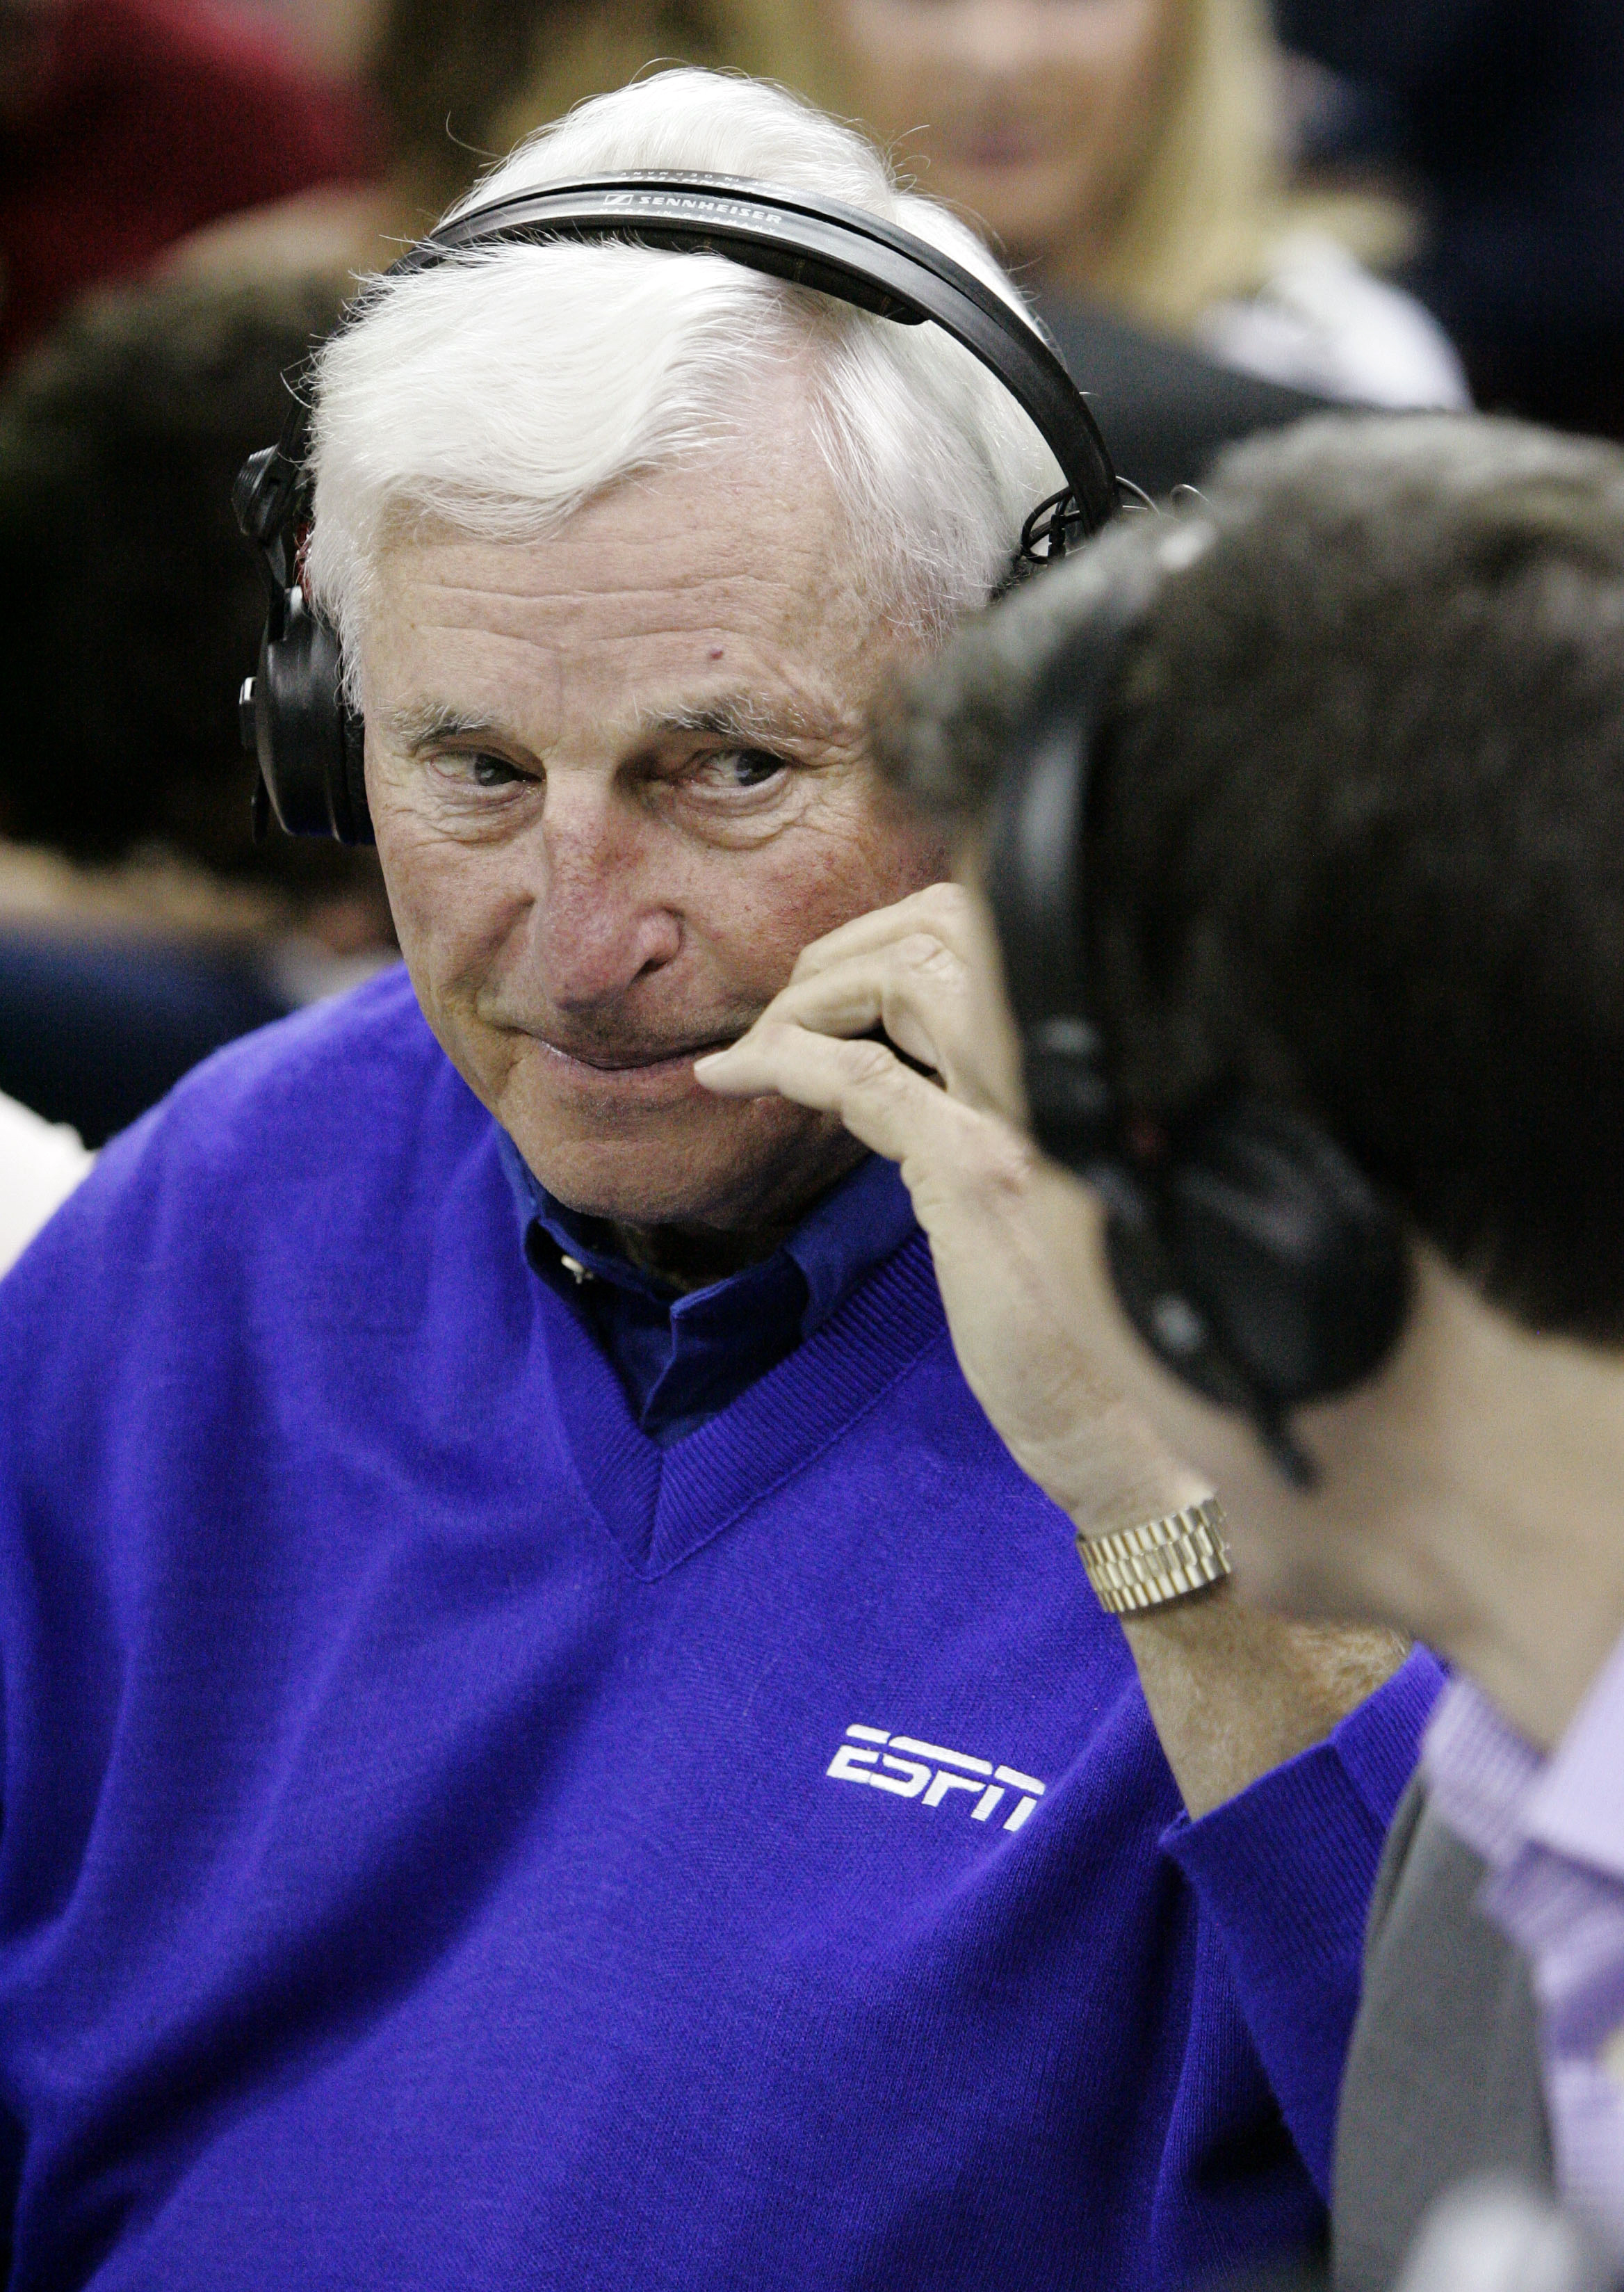 Sit down, kids: Bobby Knight can’t see